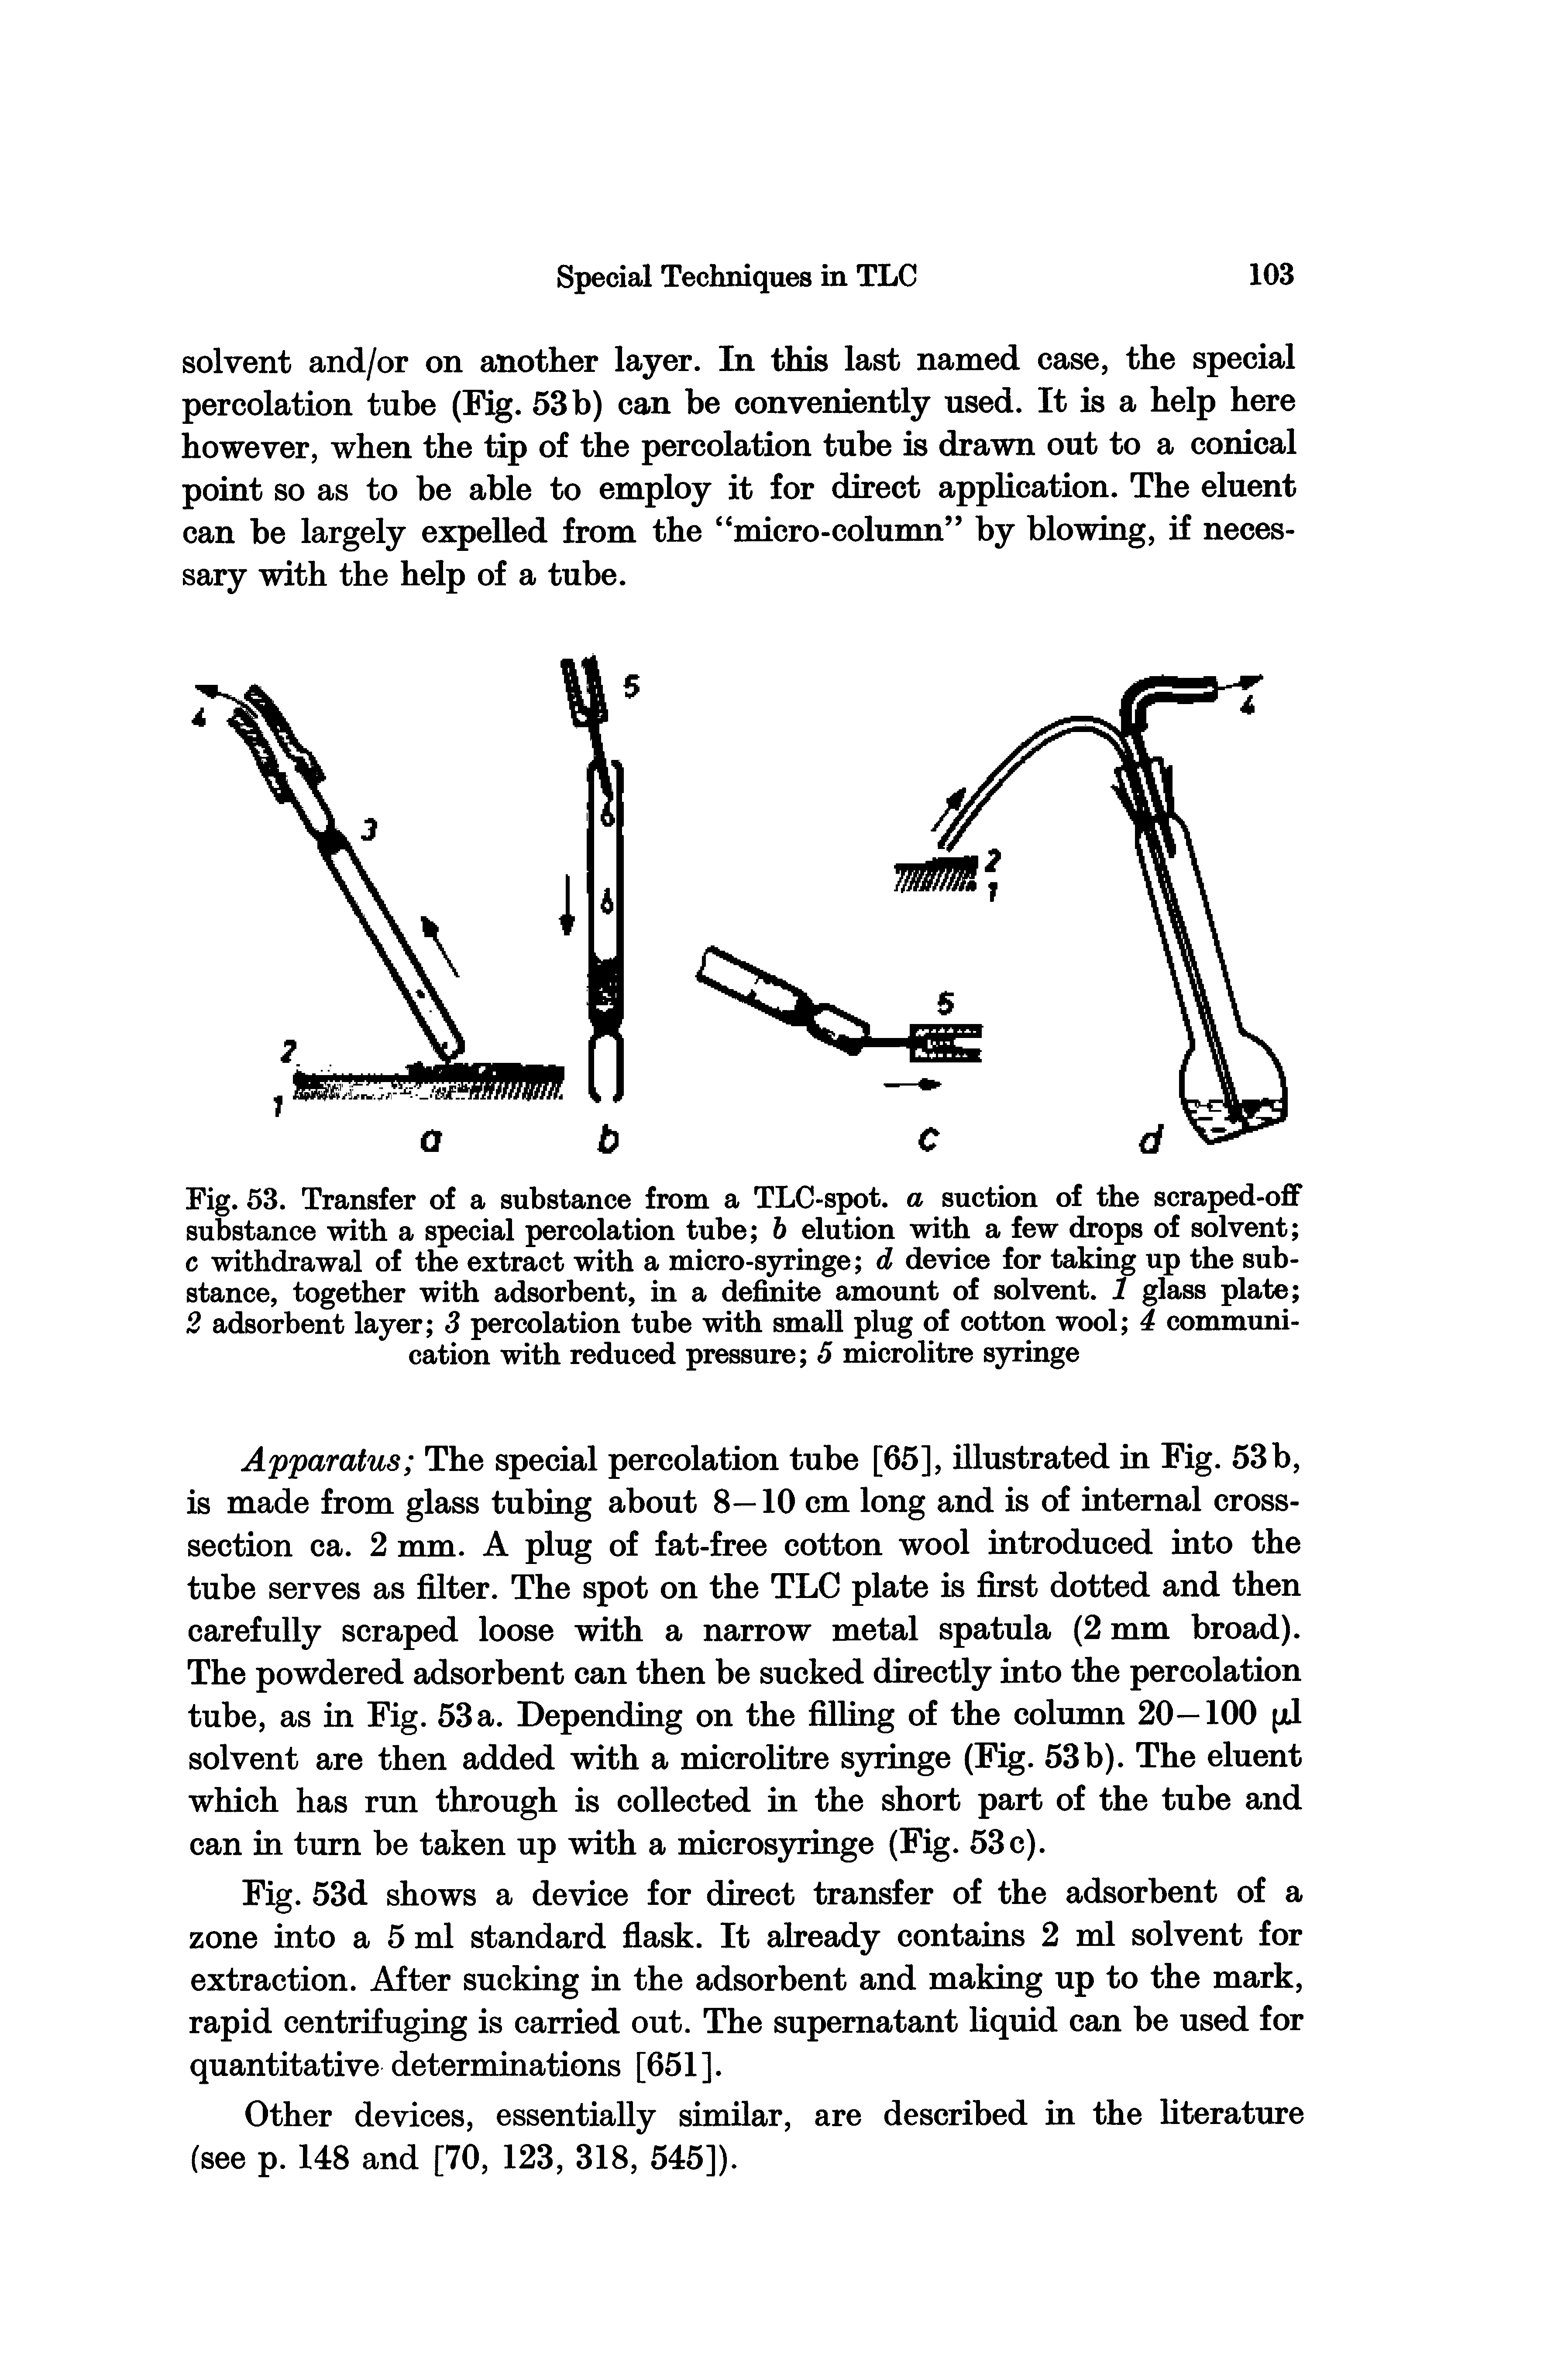 Fig. 63. Transfer of a substance from a TLC-spot. a suction of the scraped-off substance with a special percolation tube 6 elution with a few drops of solvent c withdrawal of the extract with a micro-syringe d device for taking up the substance, together with adsorbent, in a definite amount of solvent. 1 glass plate 2 adsorbent layer S percolation tube with small plug of cotton wool 4 communication with reduced pressure 5 microlitre syringe...